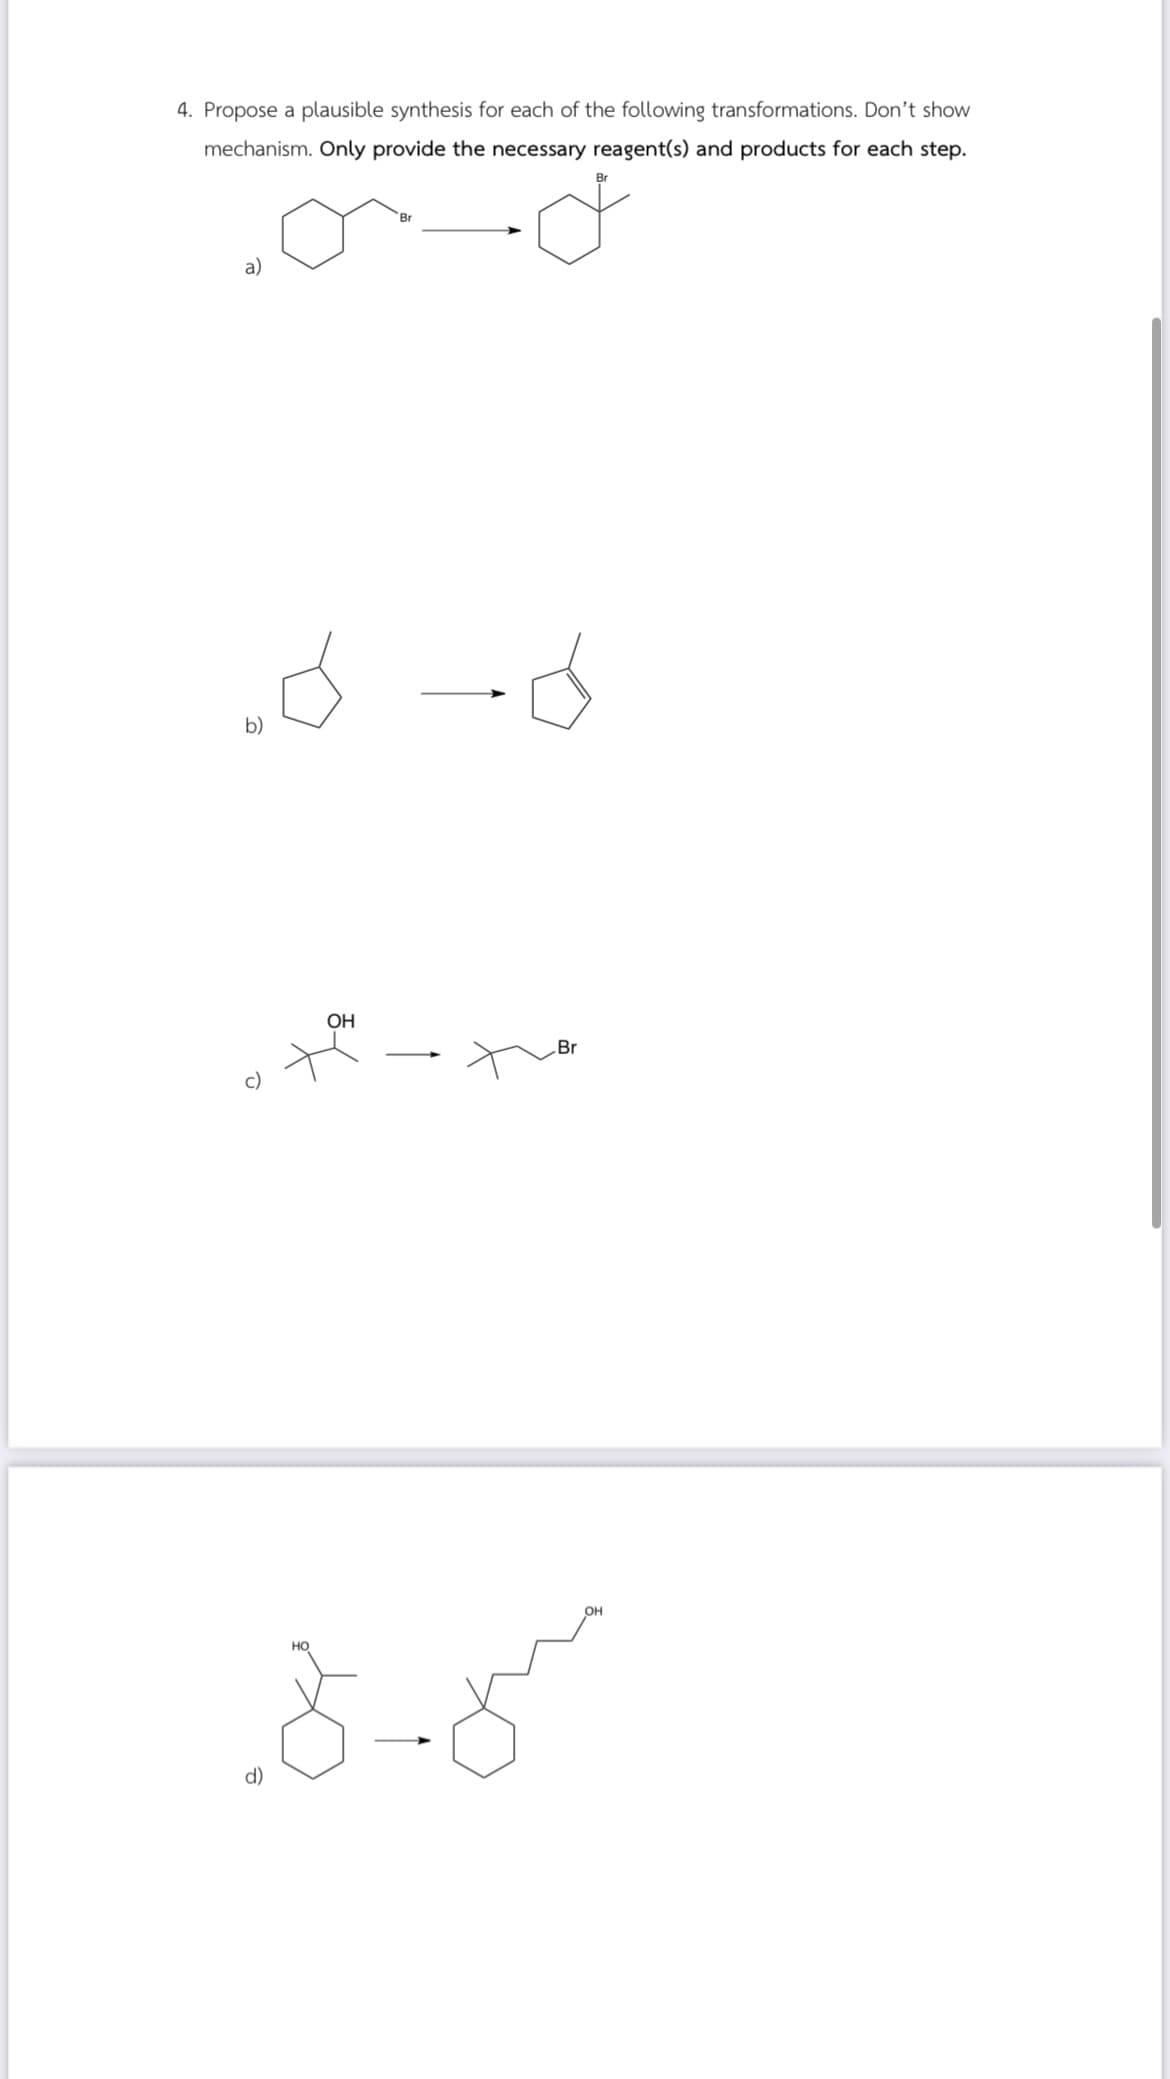 4. Propose a plausible synthesis for each of the following transformations. Don't show
mechanism. Only provide the necessary reagent(s) and products for each step.
a)
„Ó -d
b)
OH
HO
Br
میں کچھ